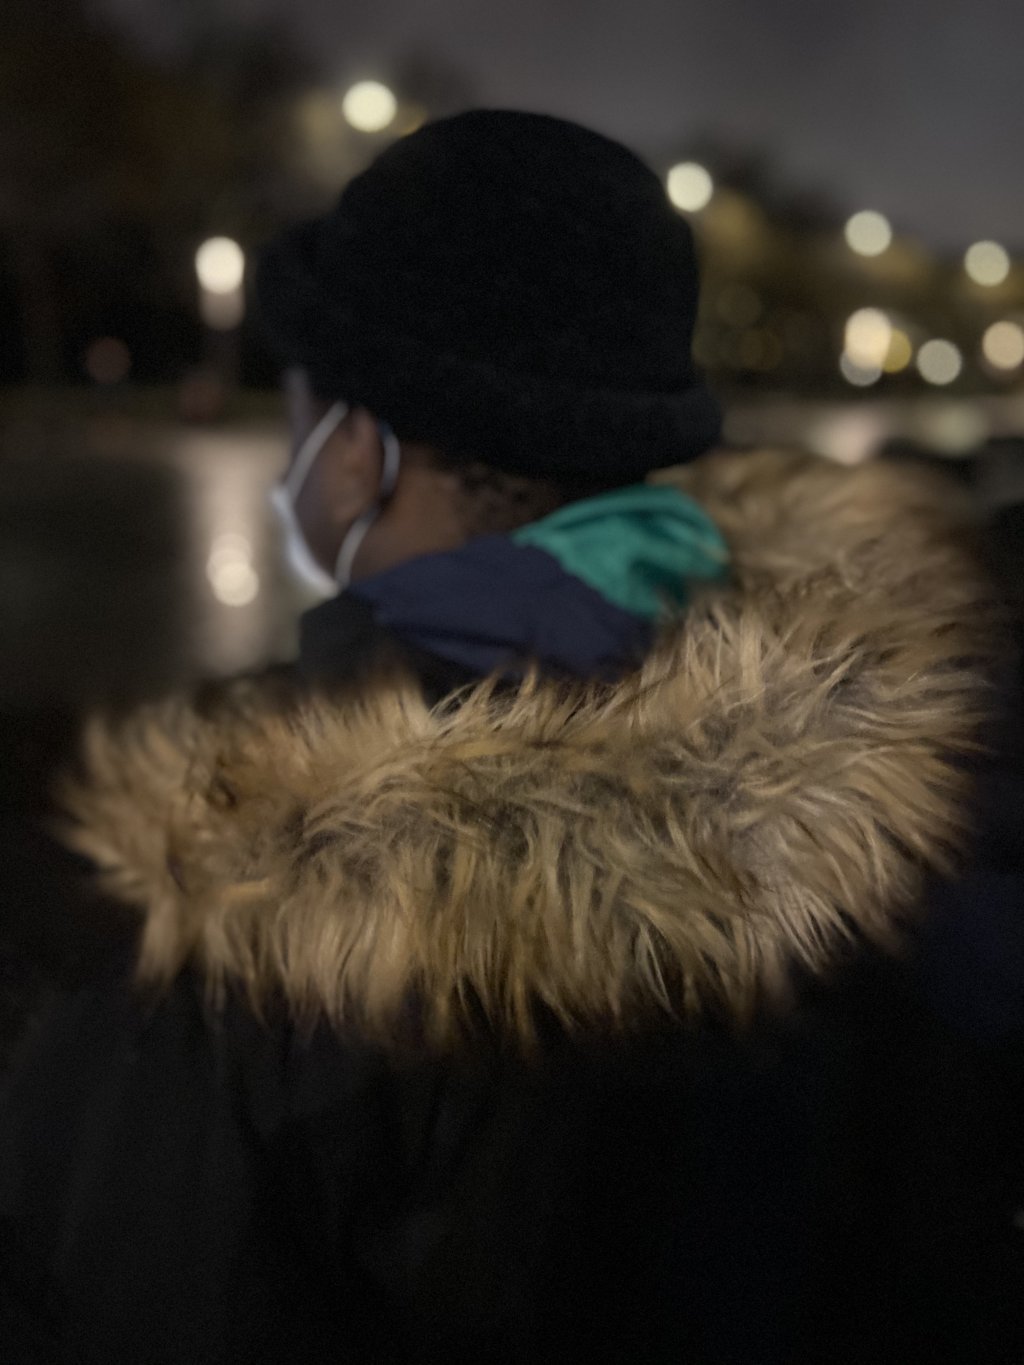 Malik, 16, is from Guinea’s capital Conakry. For four days straight, he has come to Porte d'Aubervilliers in the hope of being allocated a bed for the night through the Utopia 56 network | Photo: InfoMigrants